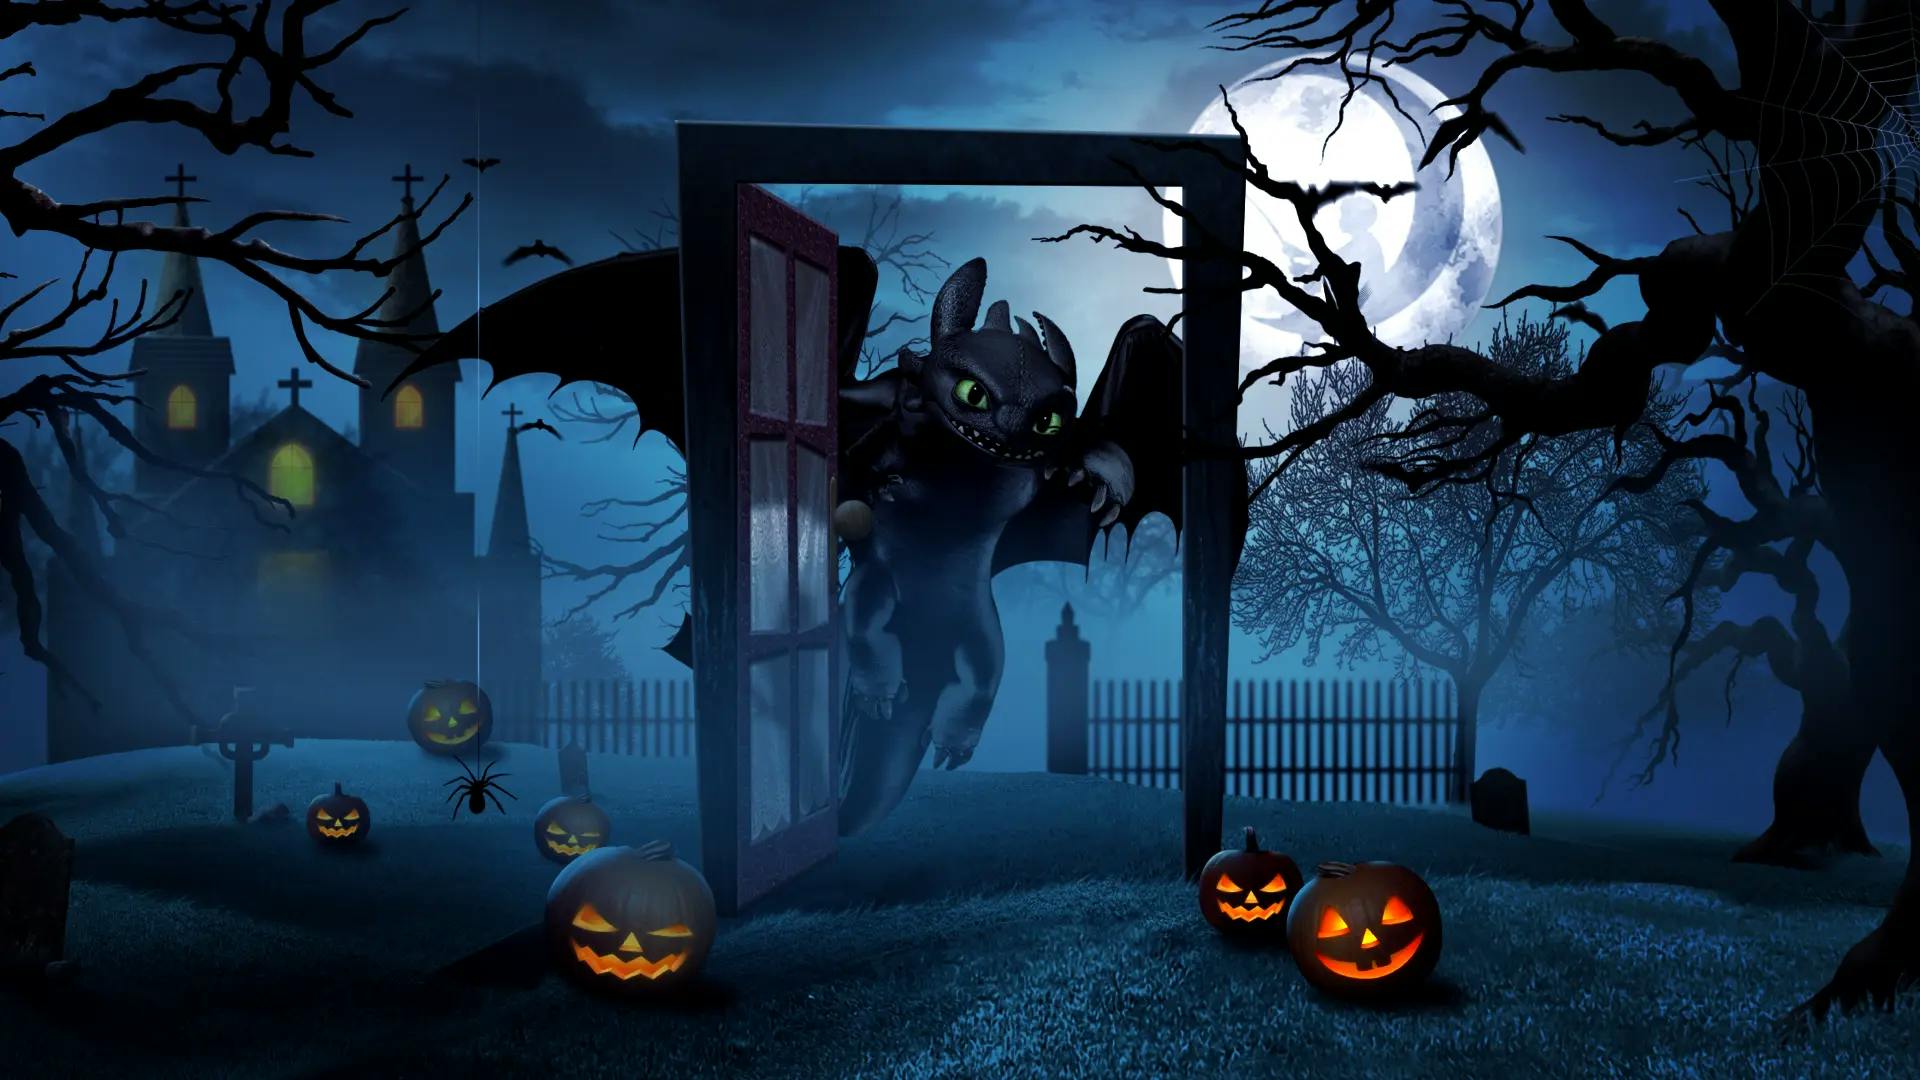 toothless from how to train your dragon is at the door to trick or treat in this Halloween asset created by studio helga for dreamworks tv